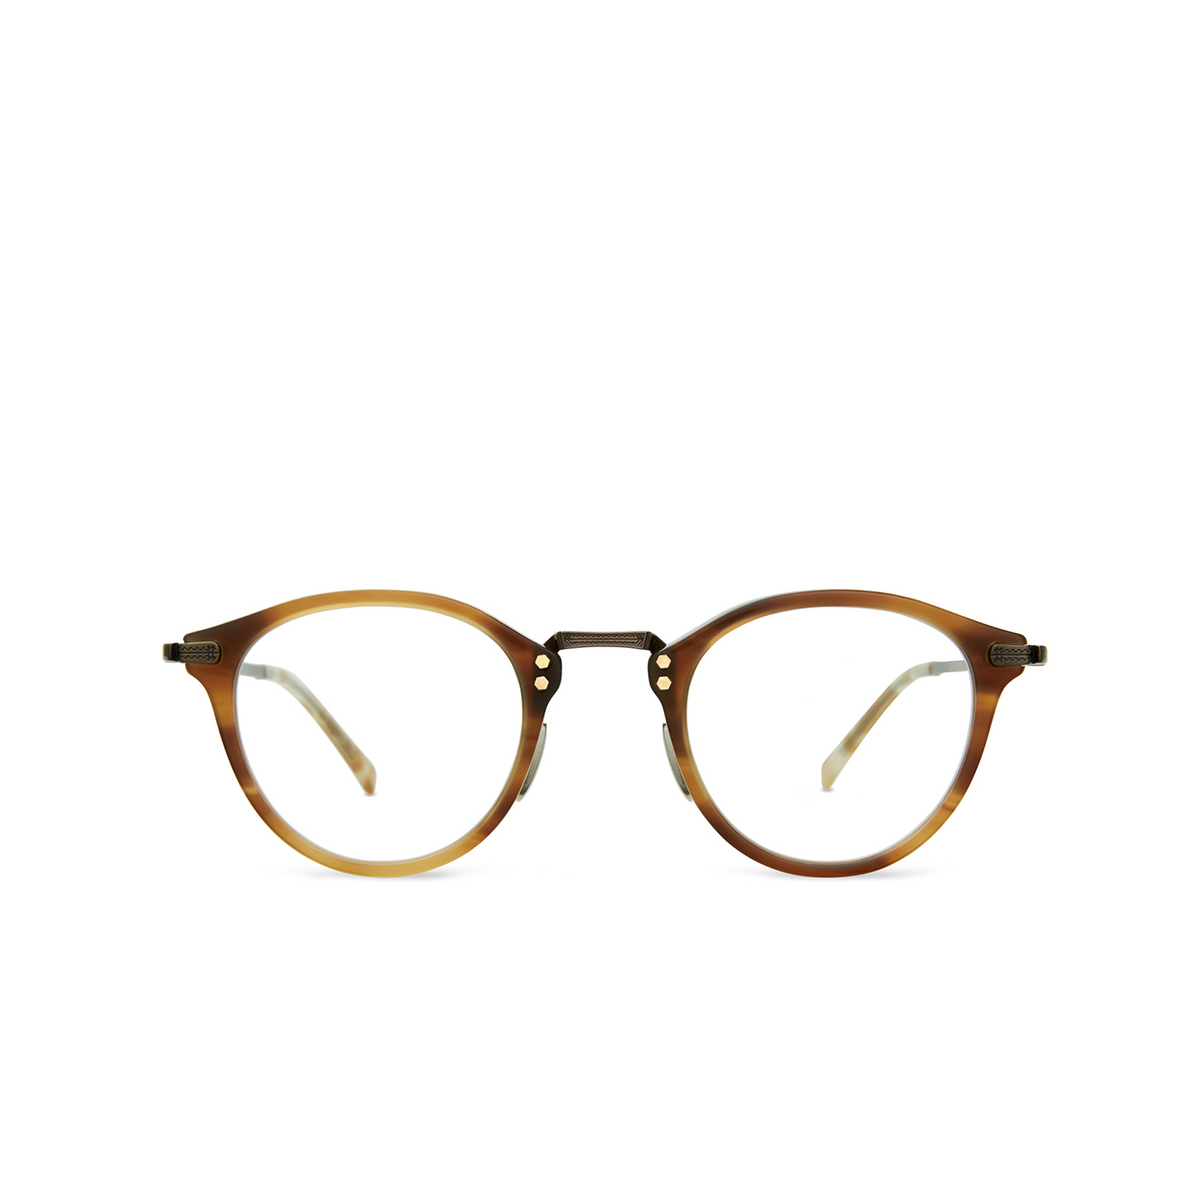 Mr. Leight STANLEY C Eyeglasses BW-ATG-SPH Beachwood-Antique Gold-Spotted Honey - front view